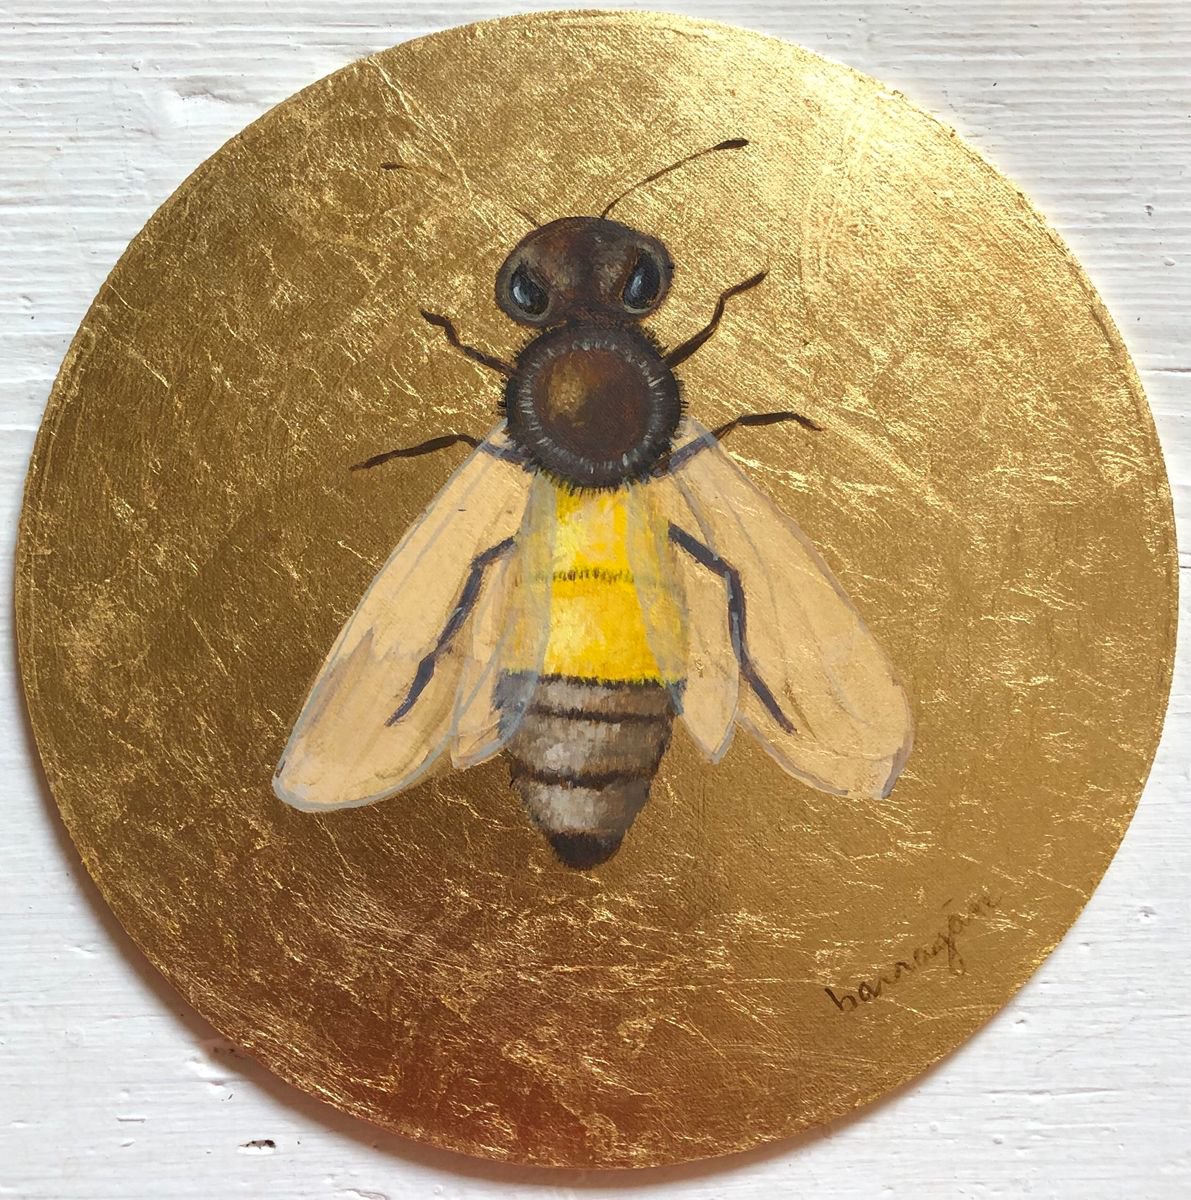 My Little Golden Honeybee Oil Painting on Round Lacquered Golden Leaf Canvas Frame by Caridad I. Barragan